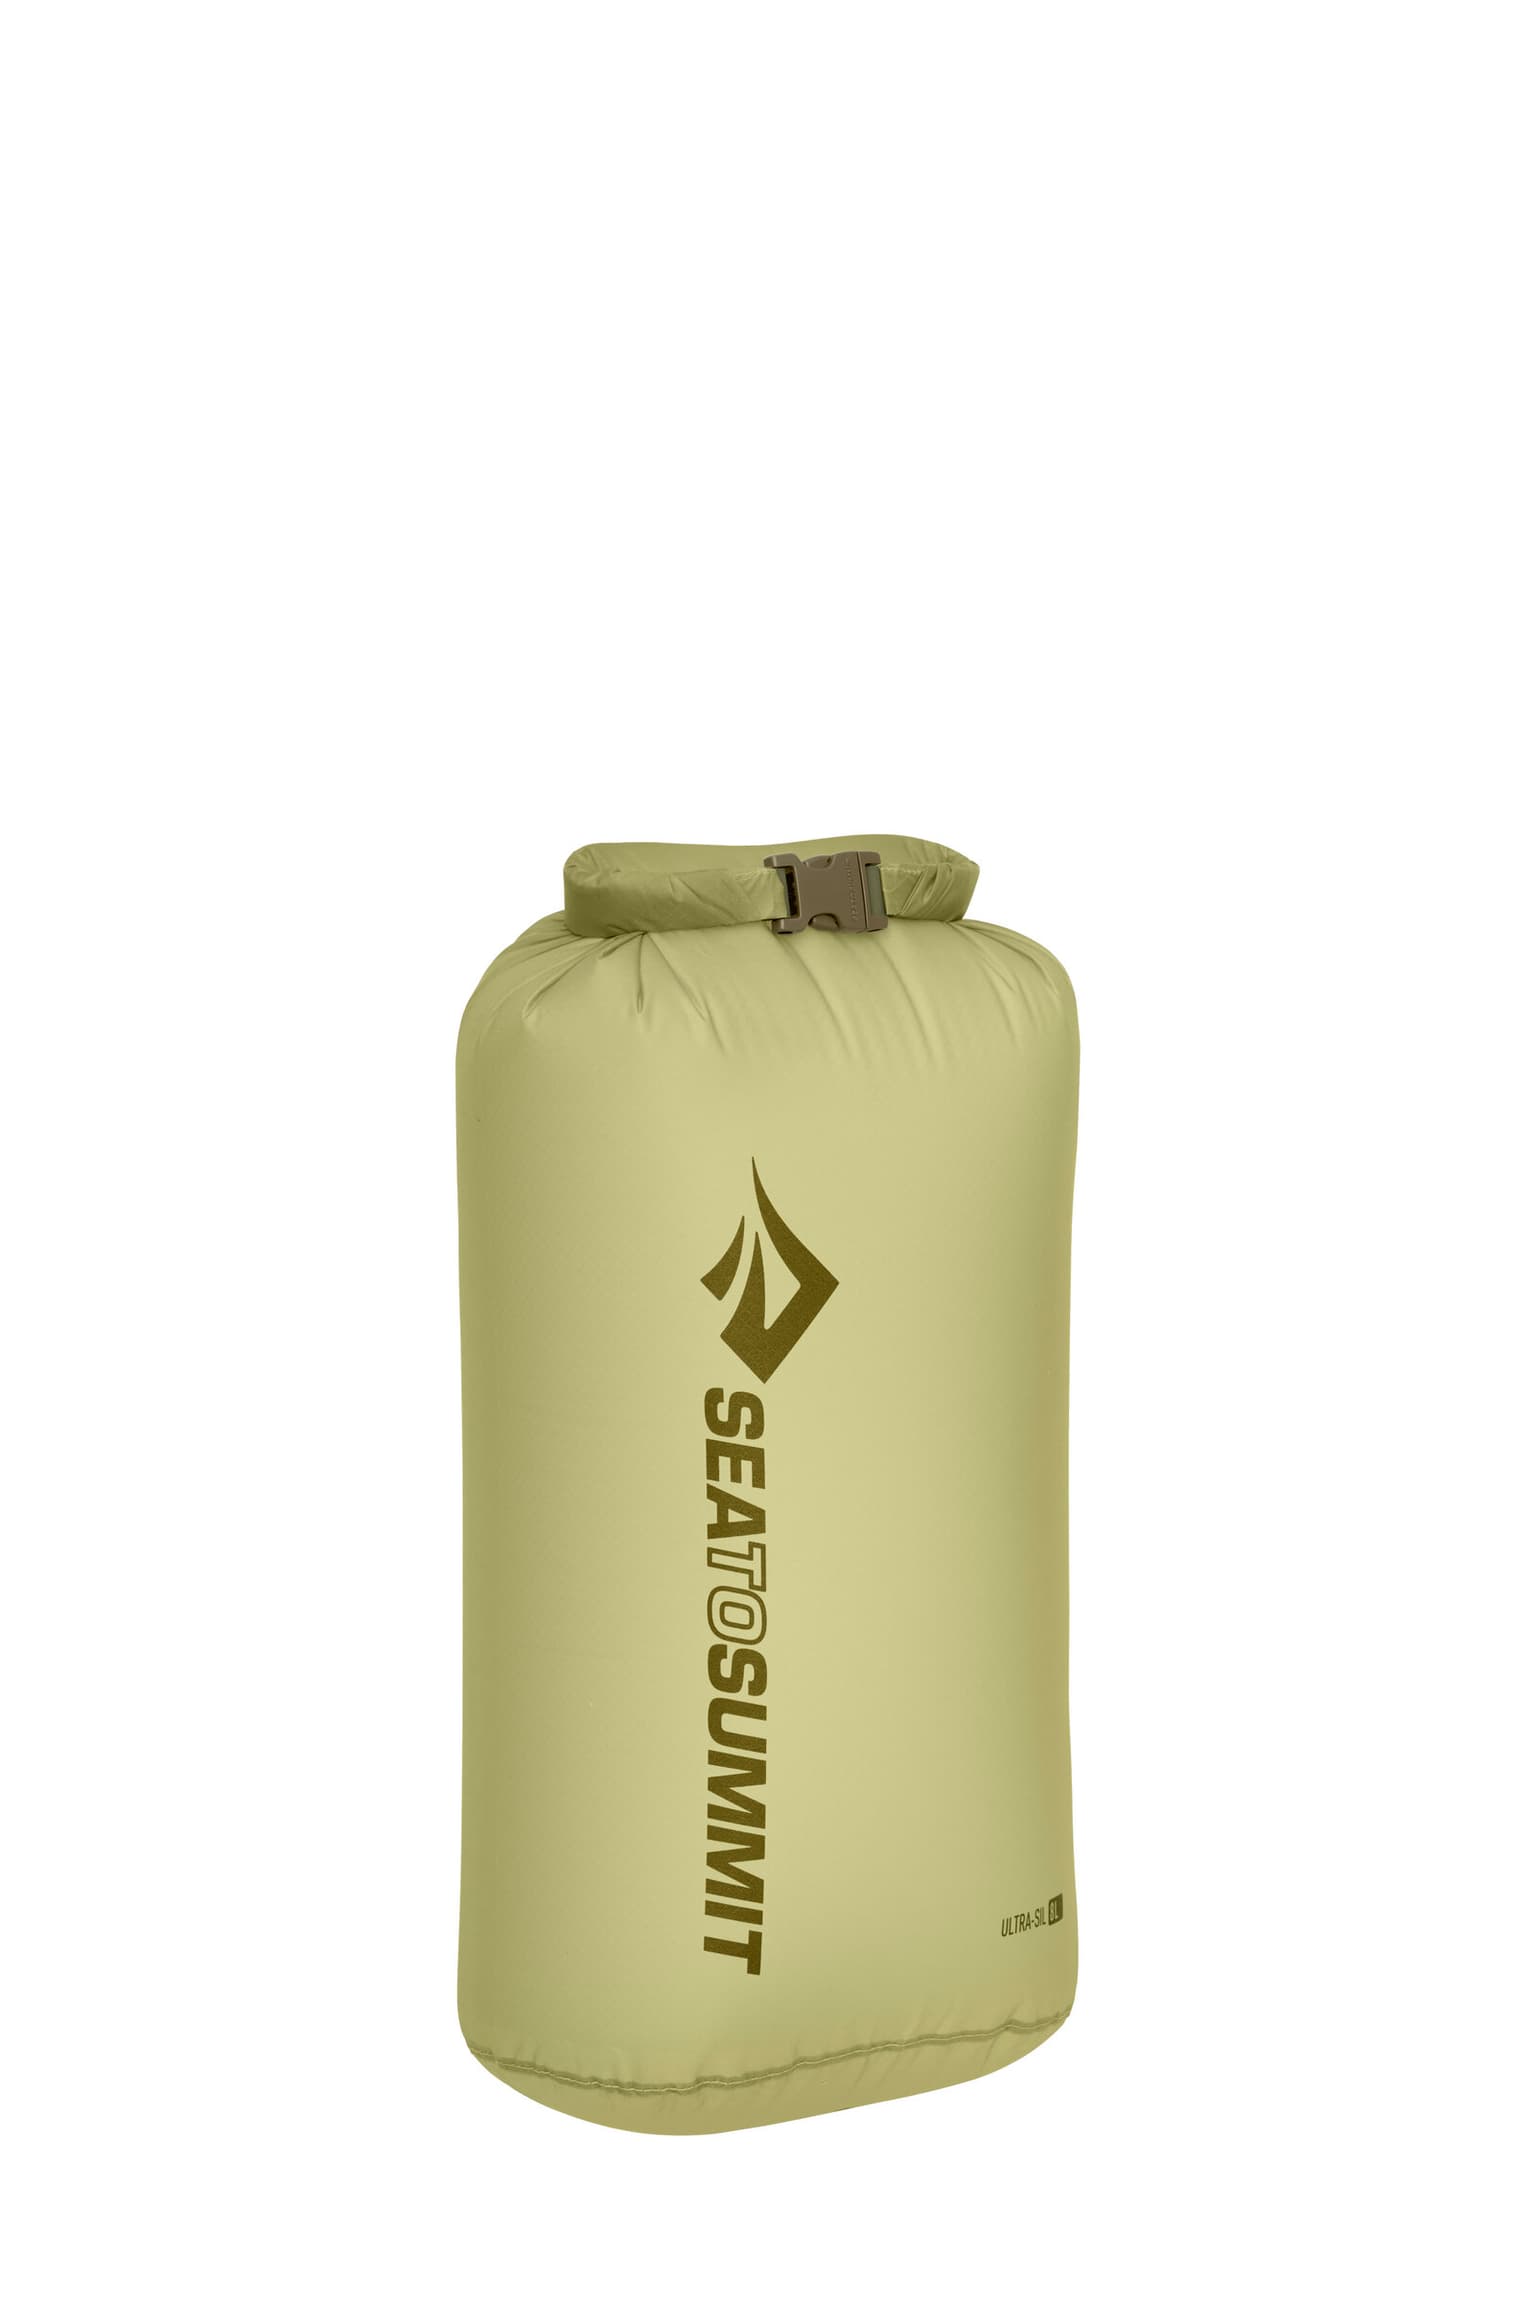 Sea To Summit Sea To Summit Ultra-Sil Dry Bag 8L Dry Bag verde-muschio 1